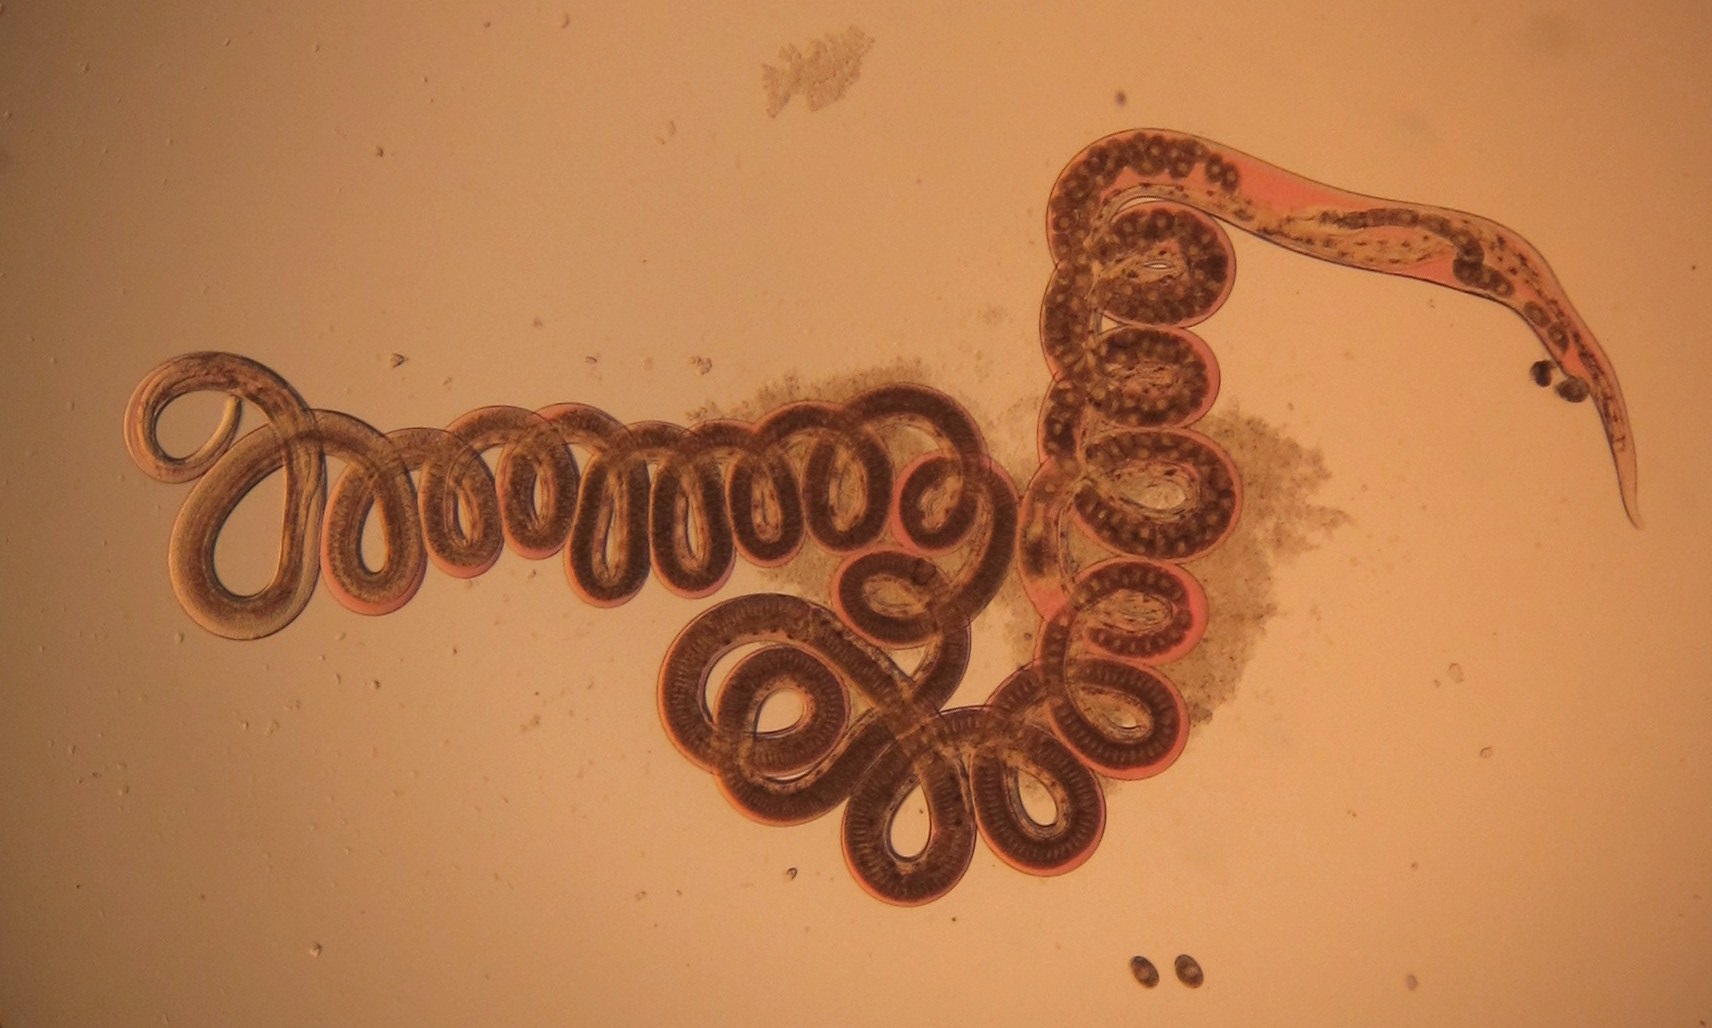 The nematode Heligmosomoides polygyrus, seen via optical microscope. Taken from the digestive tract of a wood mouse (Apodemus sylvaticus).